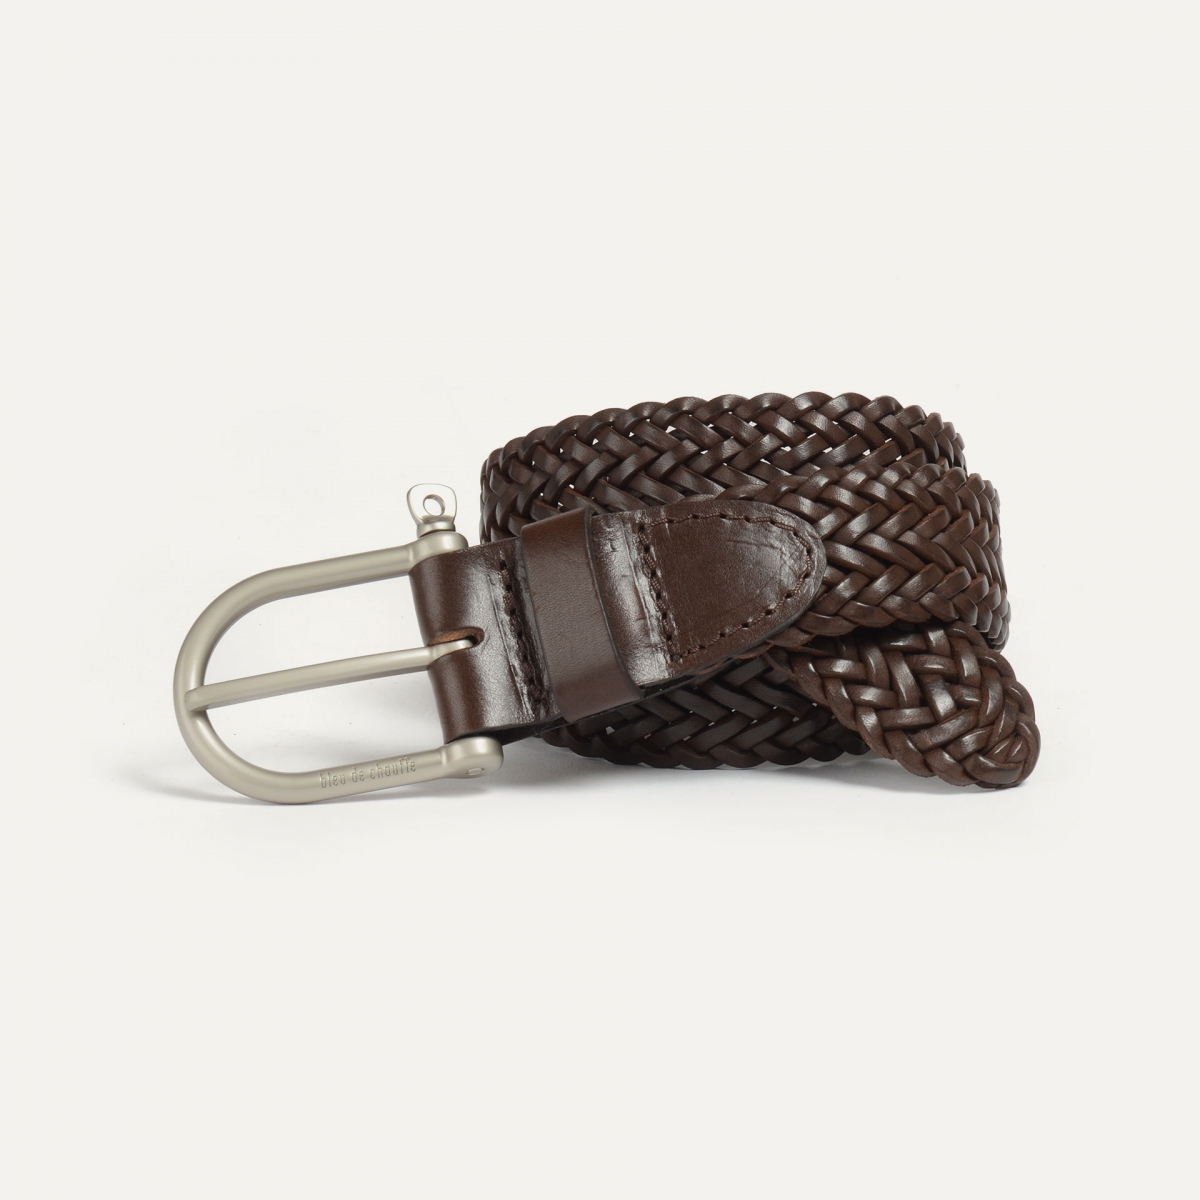 Anderson's Men's Woven Leather Belt in Brown, Size L | End Clothing